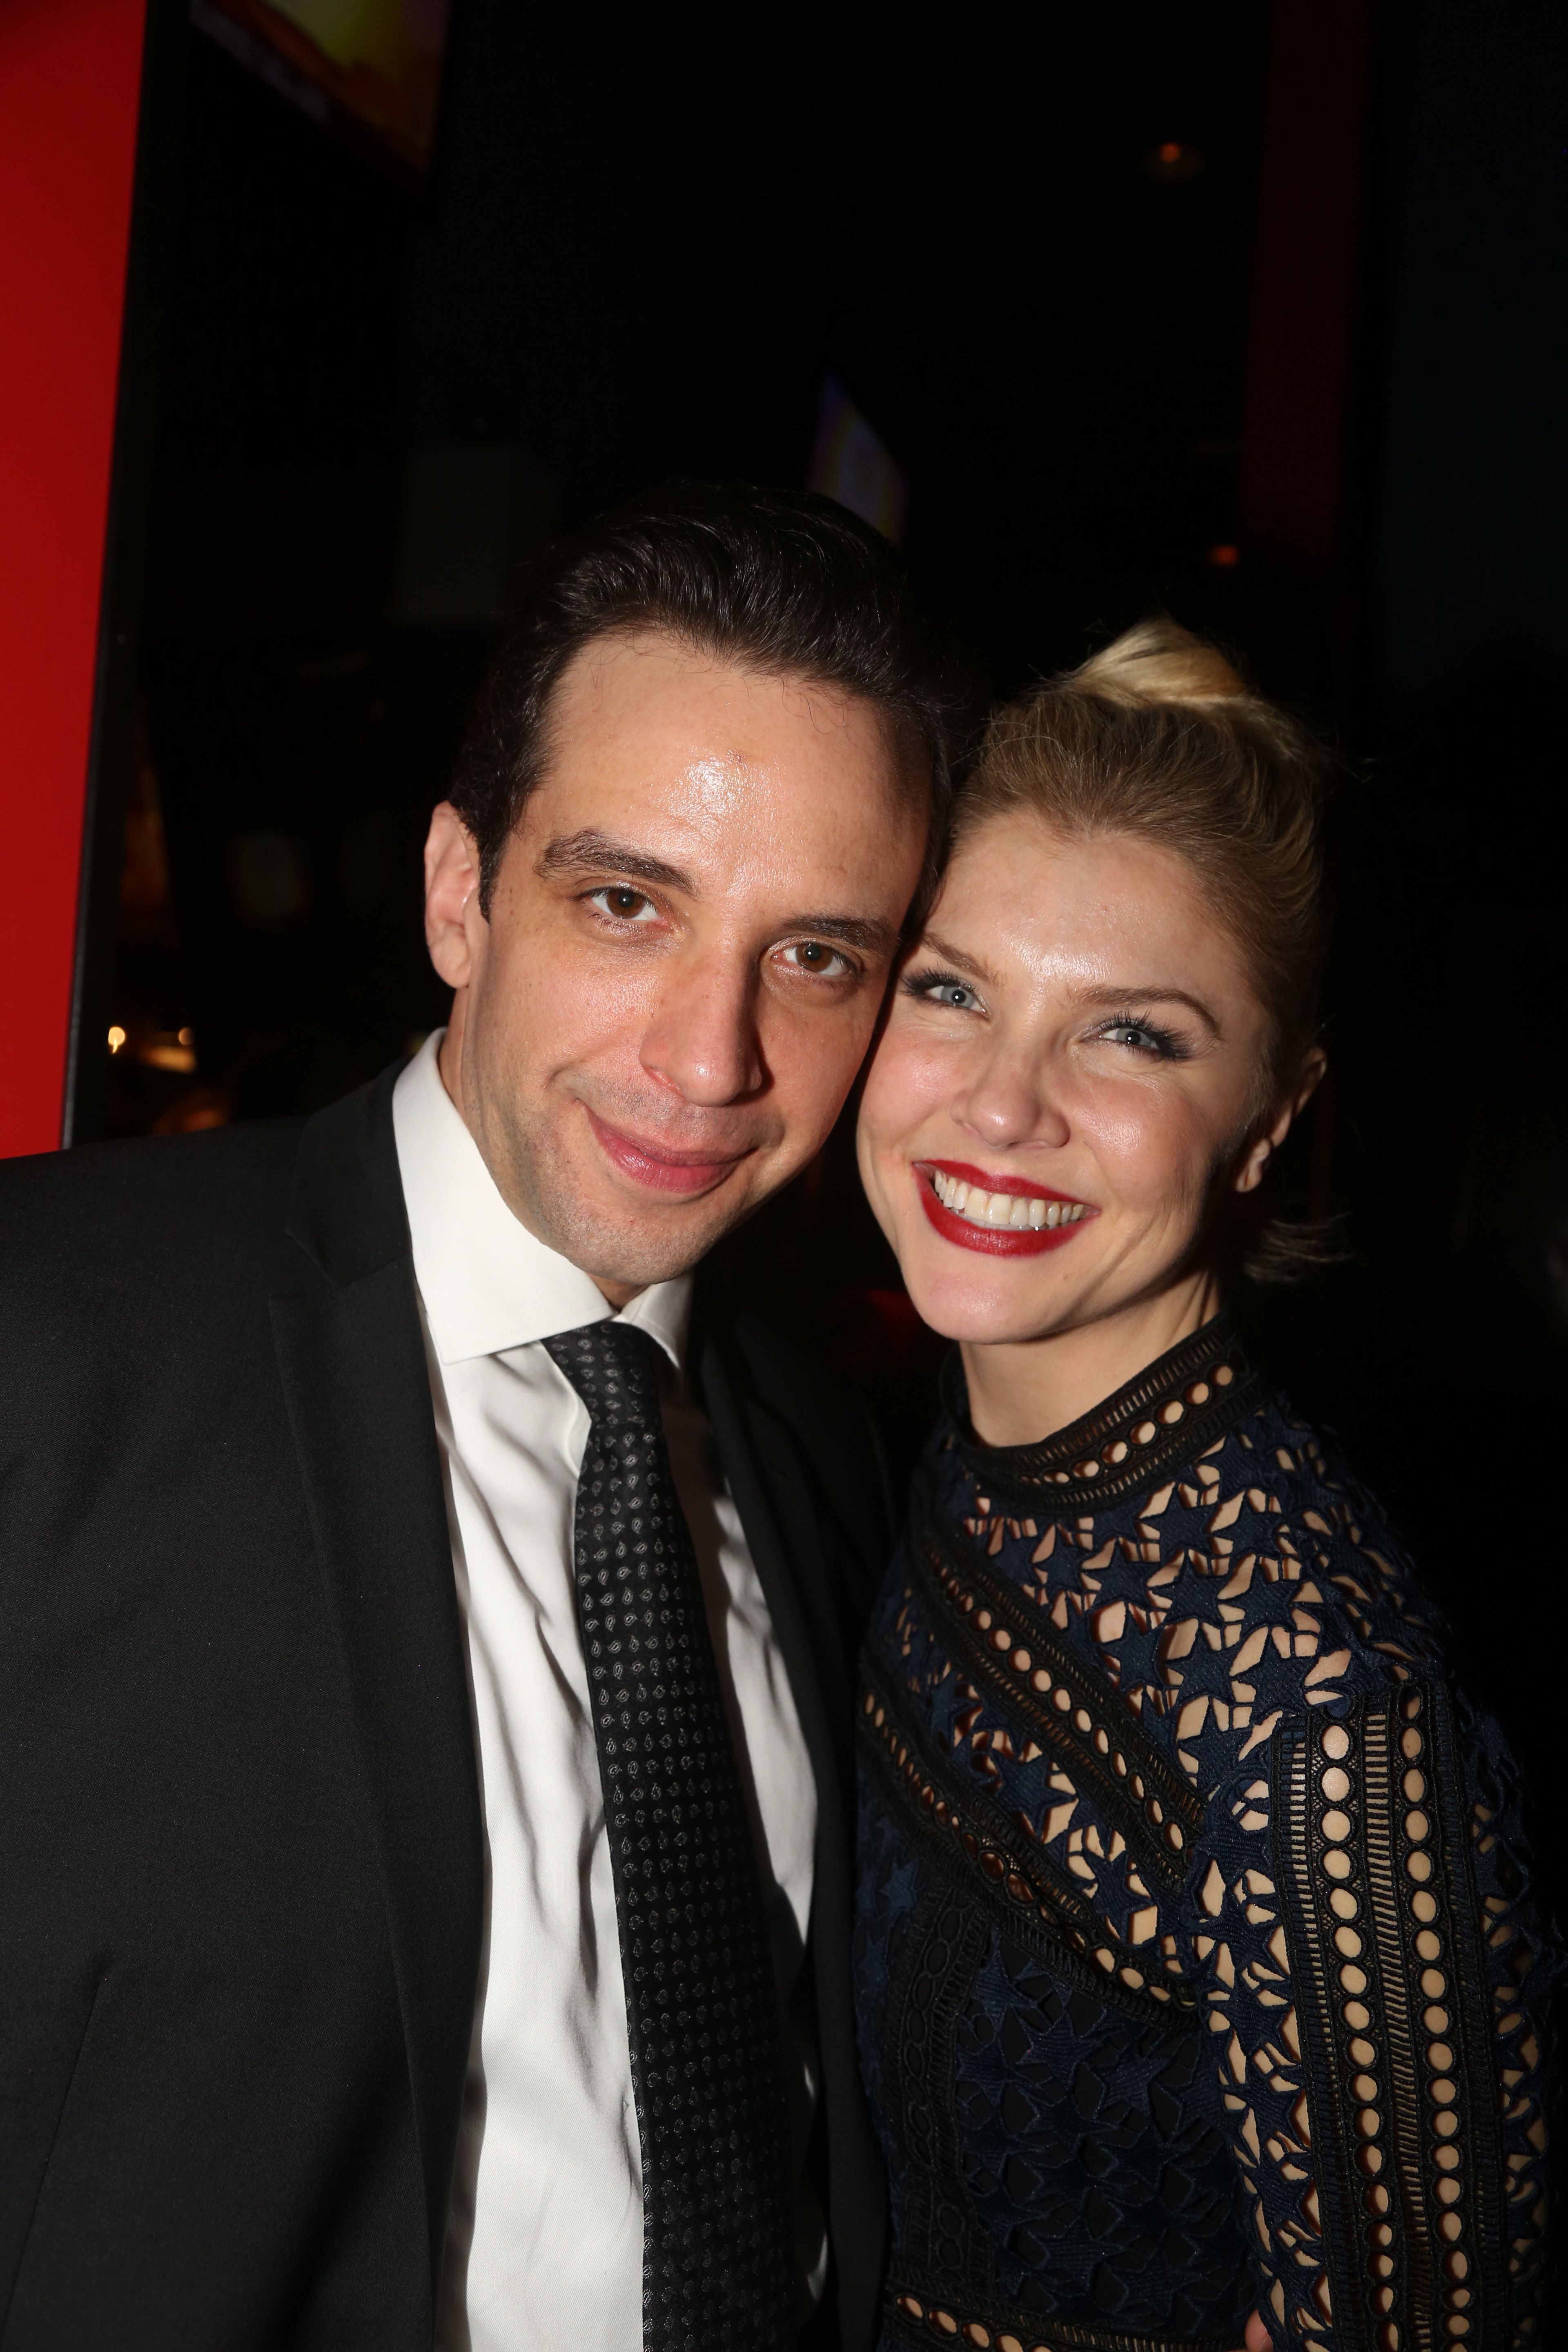 Nick Cordero and Amanda Kloots at the after party for Manhattan Concert Production's Broadway Series "Crazy For You" on February 19, 2017 in New York City | Photo: Getty Images